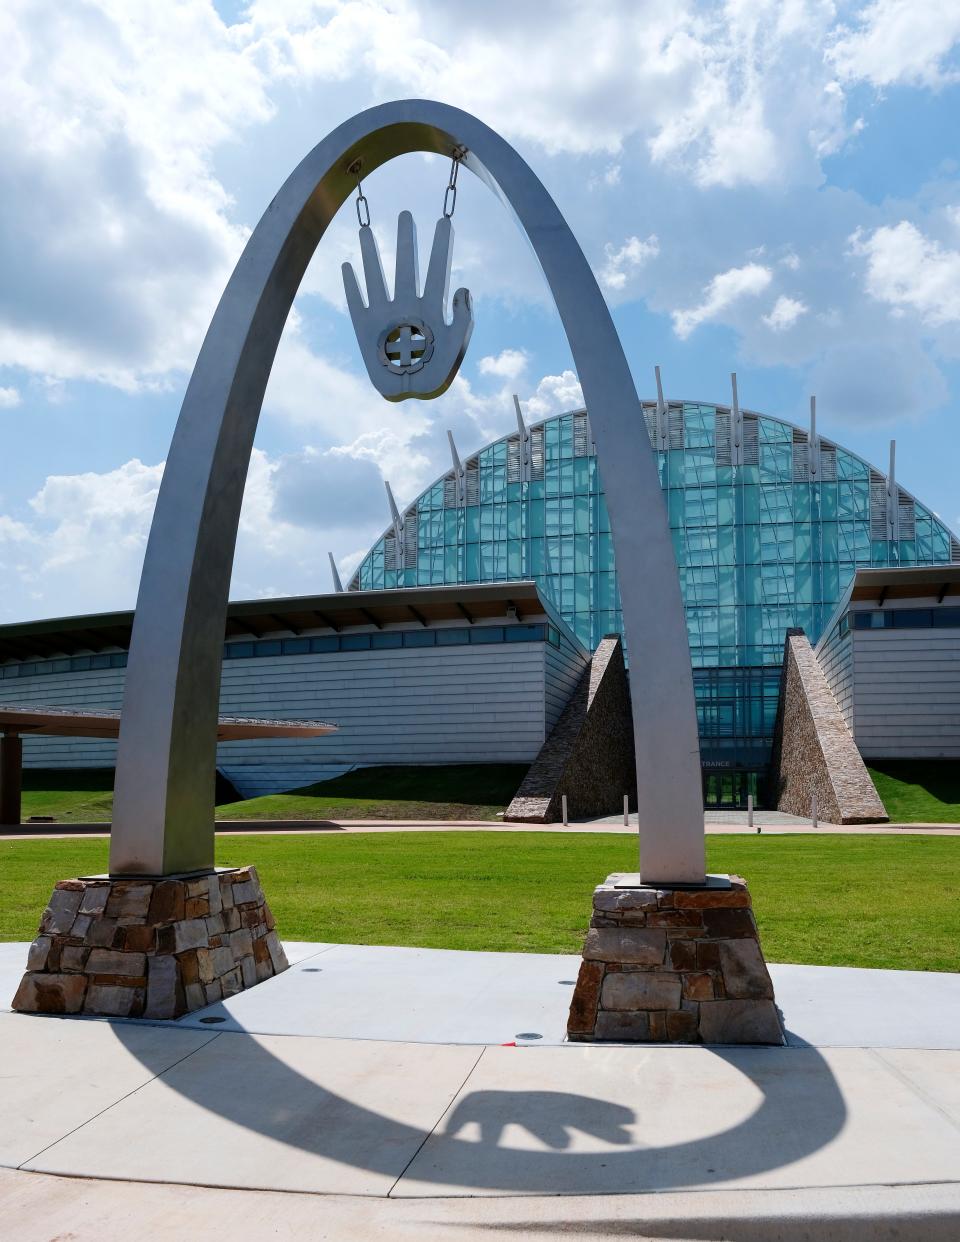 The sculpture "Touch to Above" by Cherokee artists Demos Glass and Bill Glass Jr., greets visitors at the First Americans Museum in Oklahoma City. The open hand is the universal welcome greeting for Native Americans and the cross represents the four directions, meaning all are welcome.